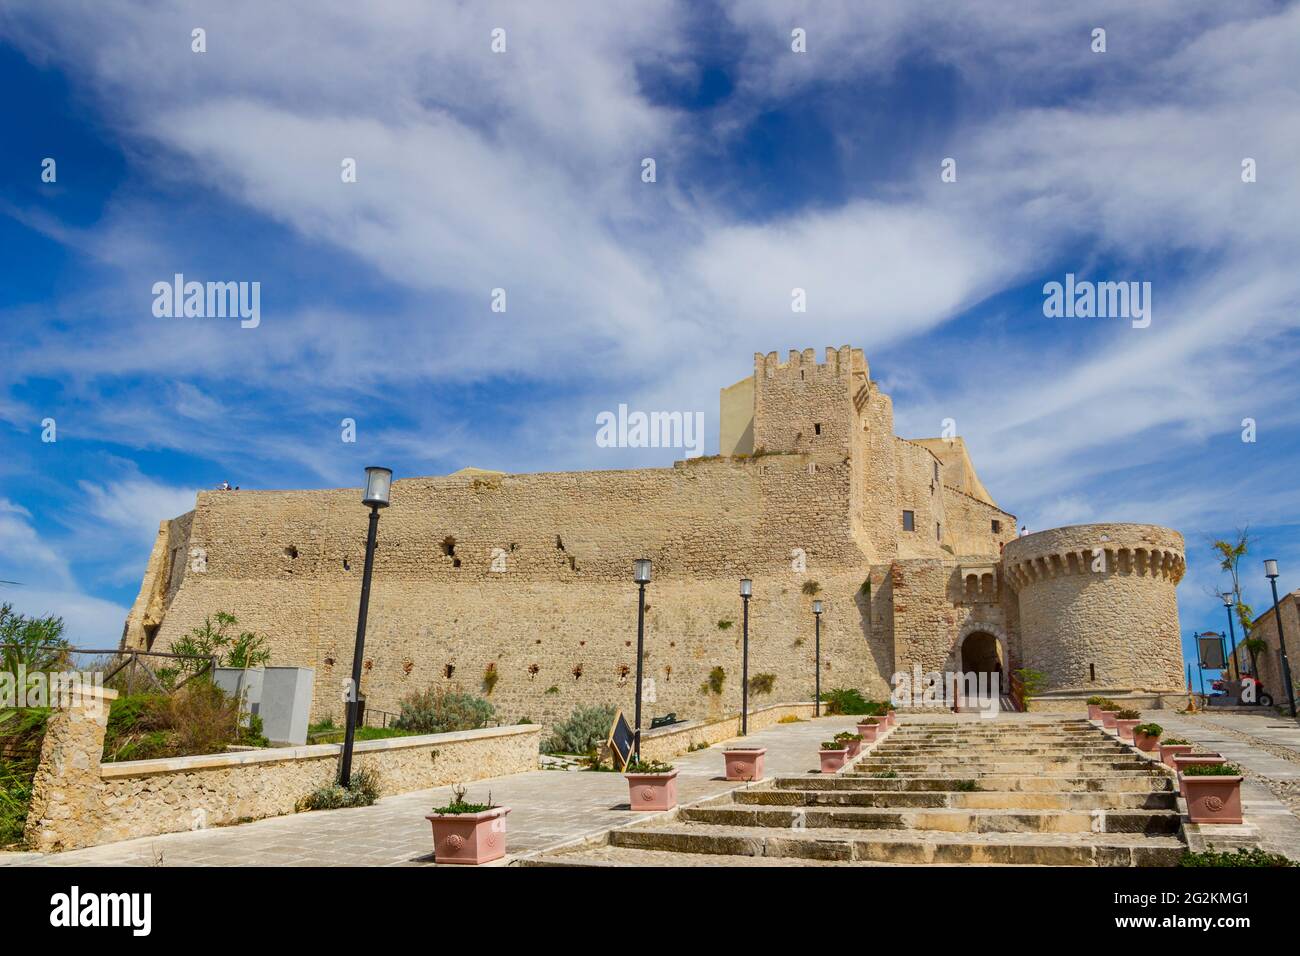 Walls of the fortified citadel on the island of San Nicola, in the Tremiti islands: the Abbey of Santa Maria a Mare fortified complex, Apulia, Italy. Stock Photo